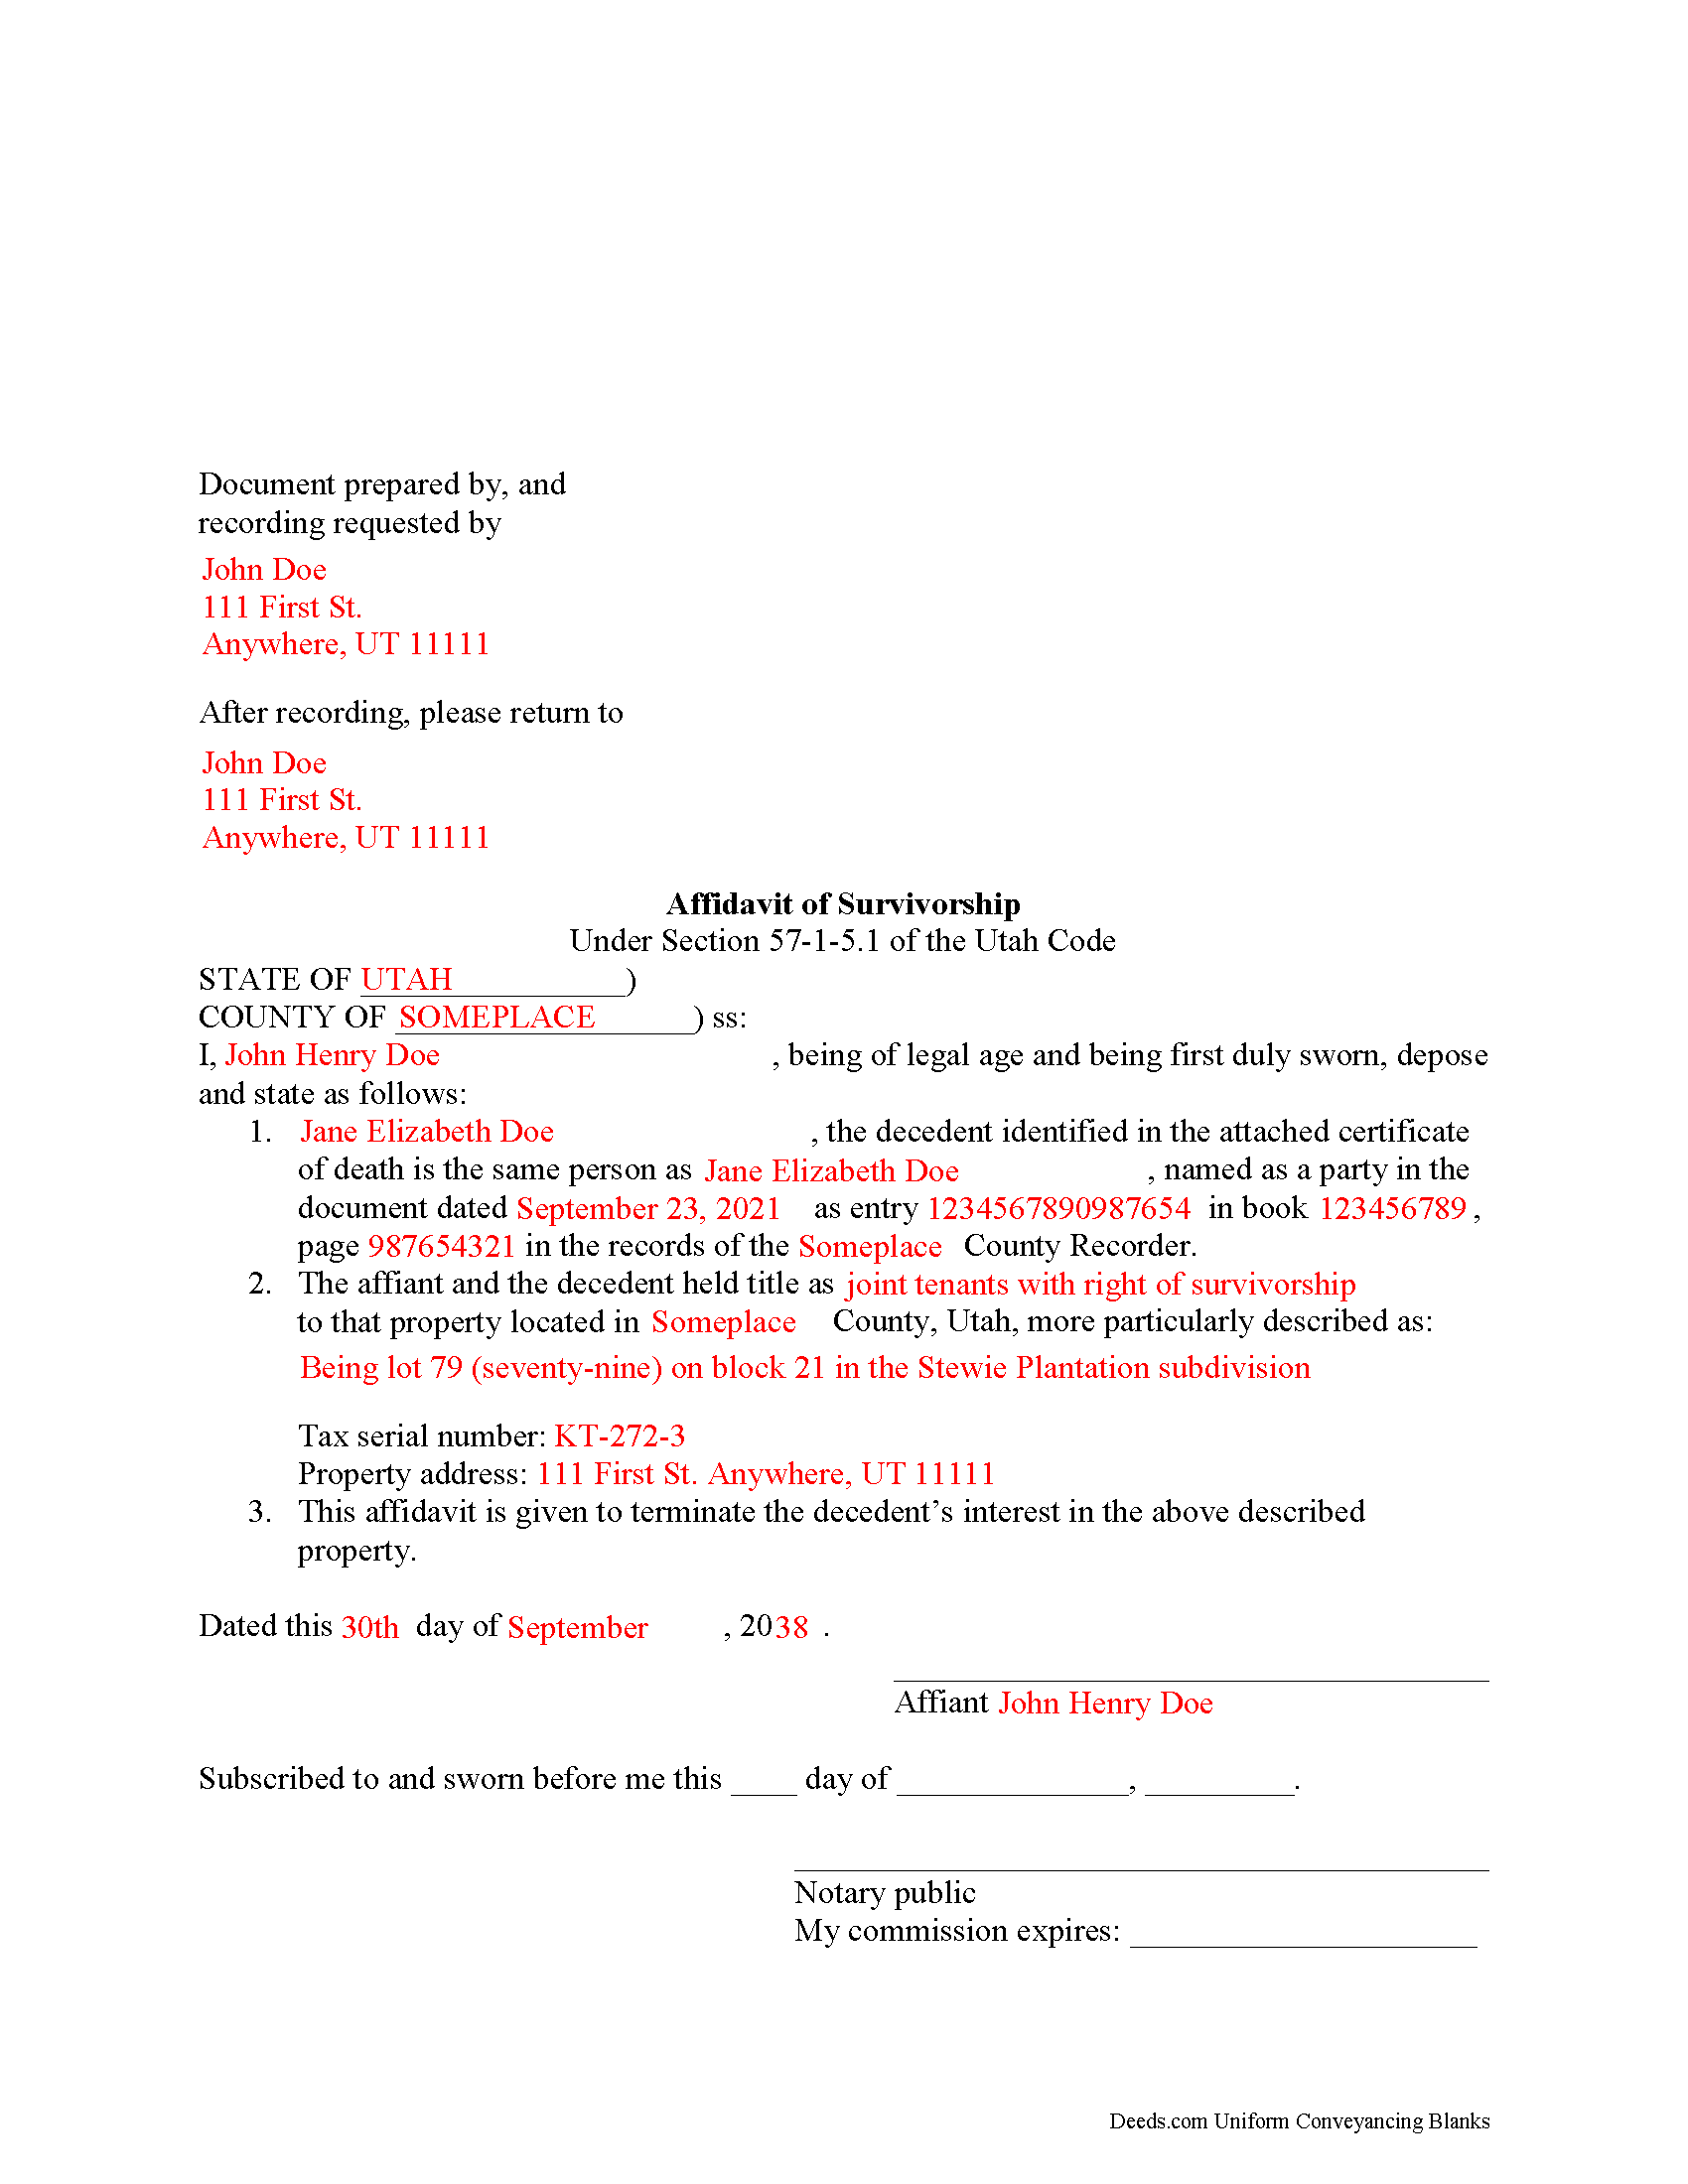 Completed Example of the Affidavit of Surviving Joint Tenant Document